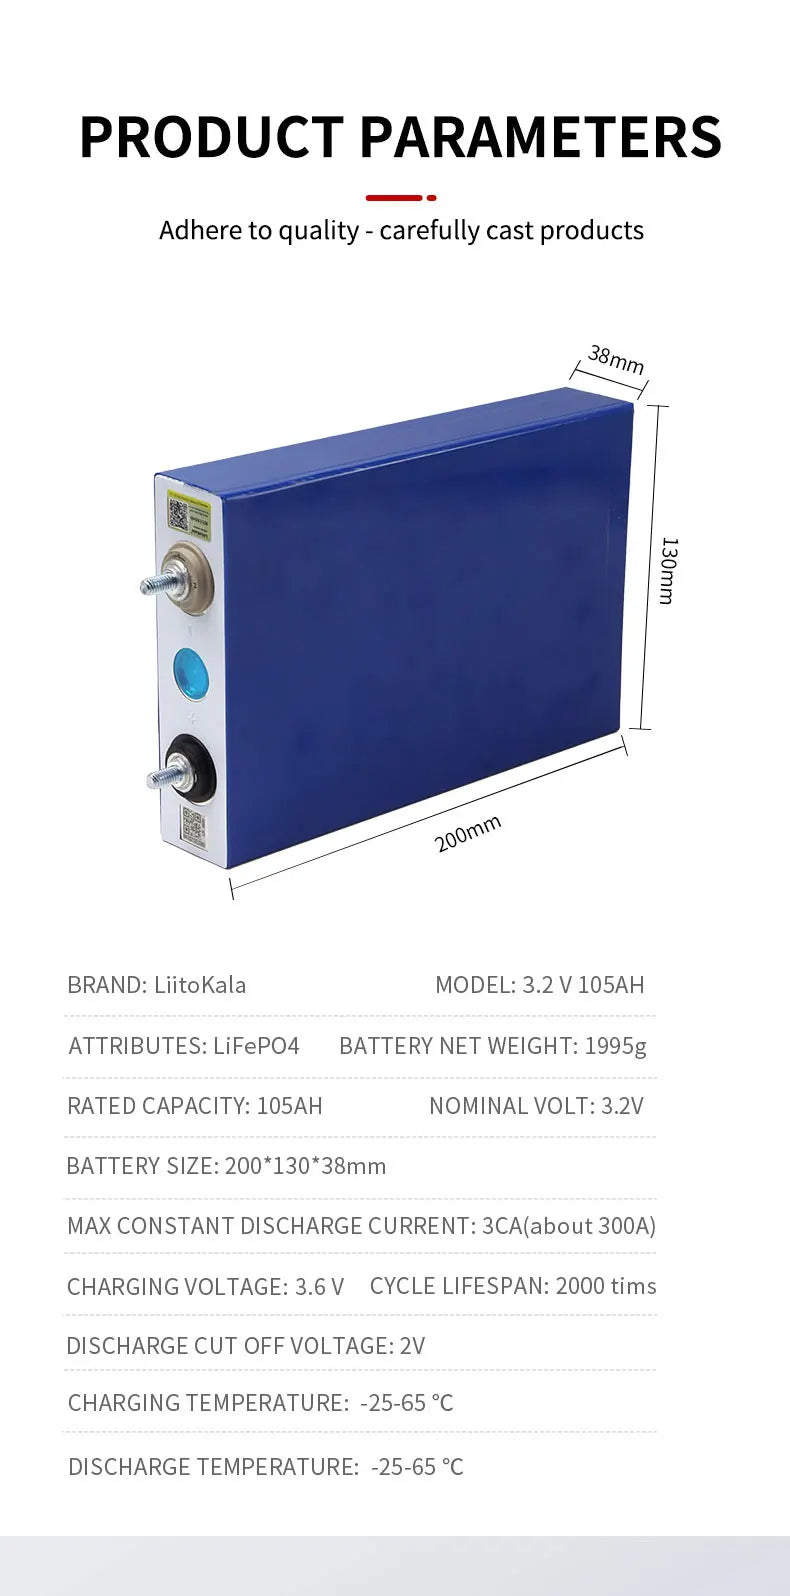 Liitokala 3.2V 105Ah LiFePO4 battery, Lithium Iron Phosphate battery for electric vehicles and solar power systems.